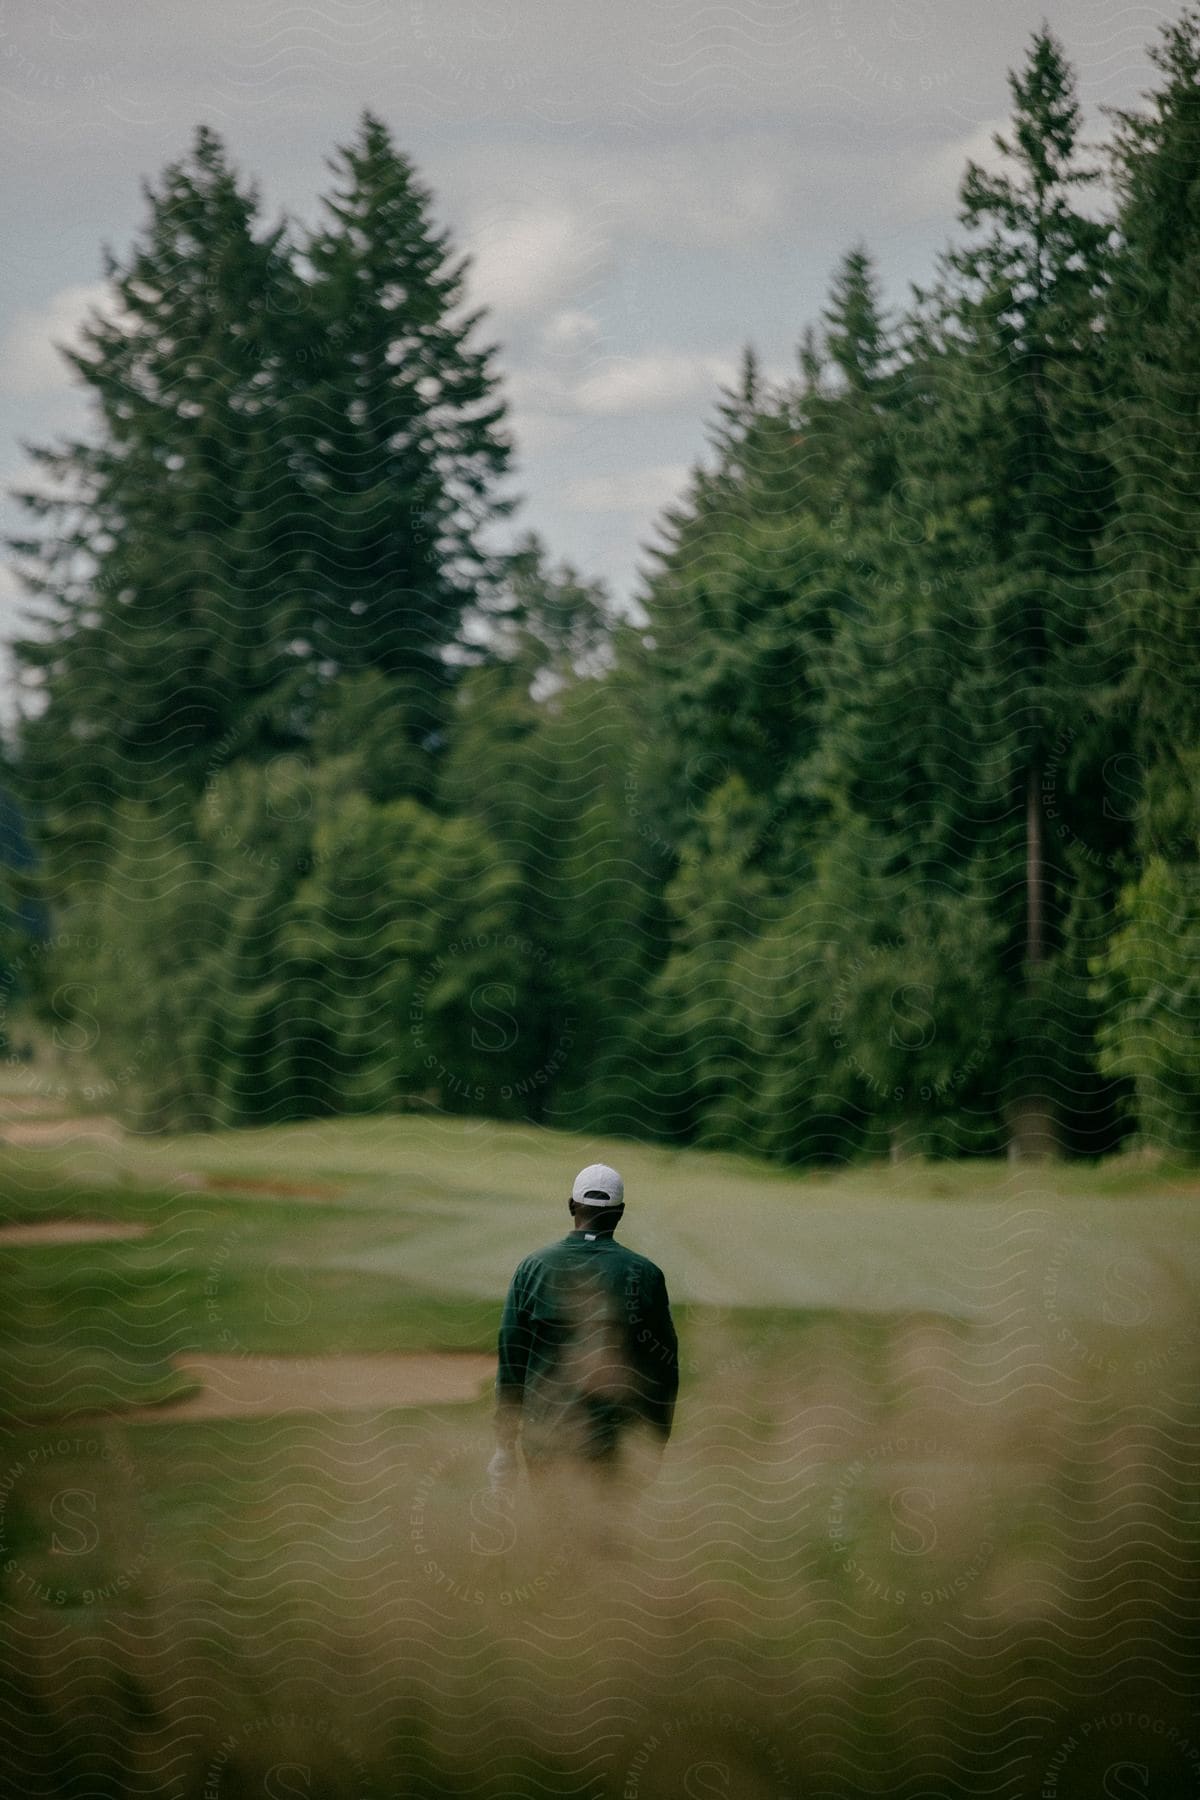 A man walking towards a green playing field on a golf course